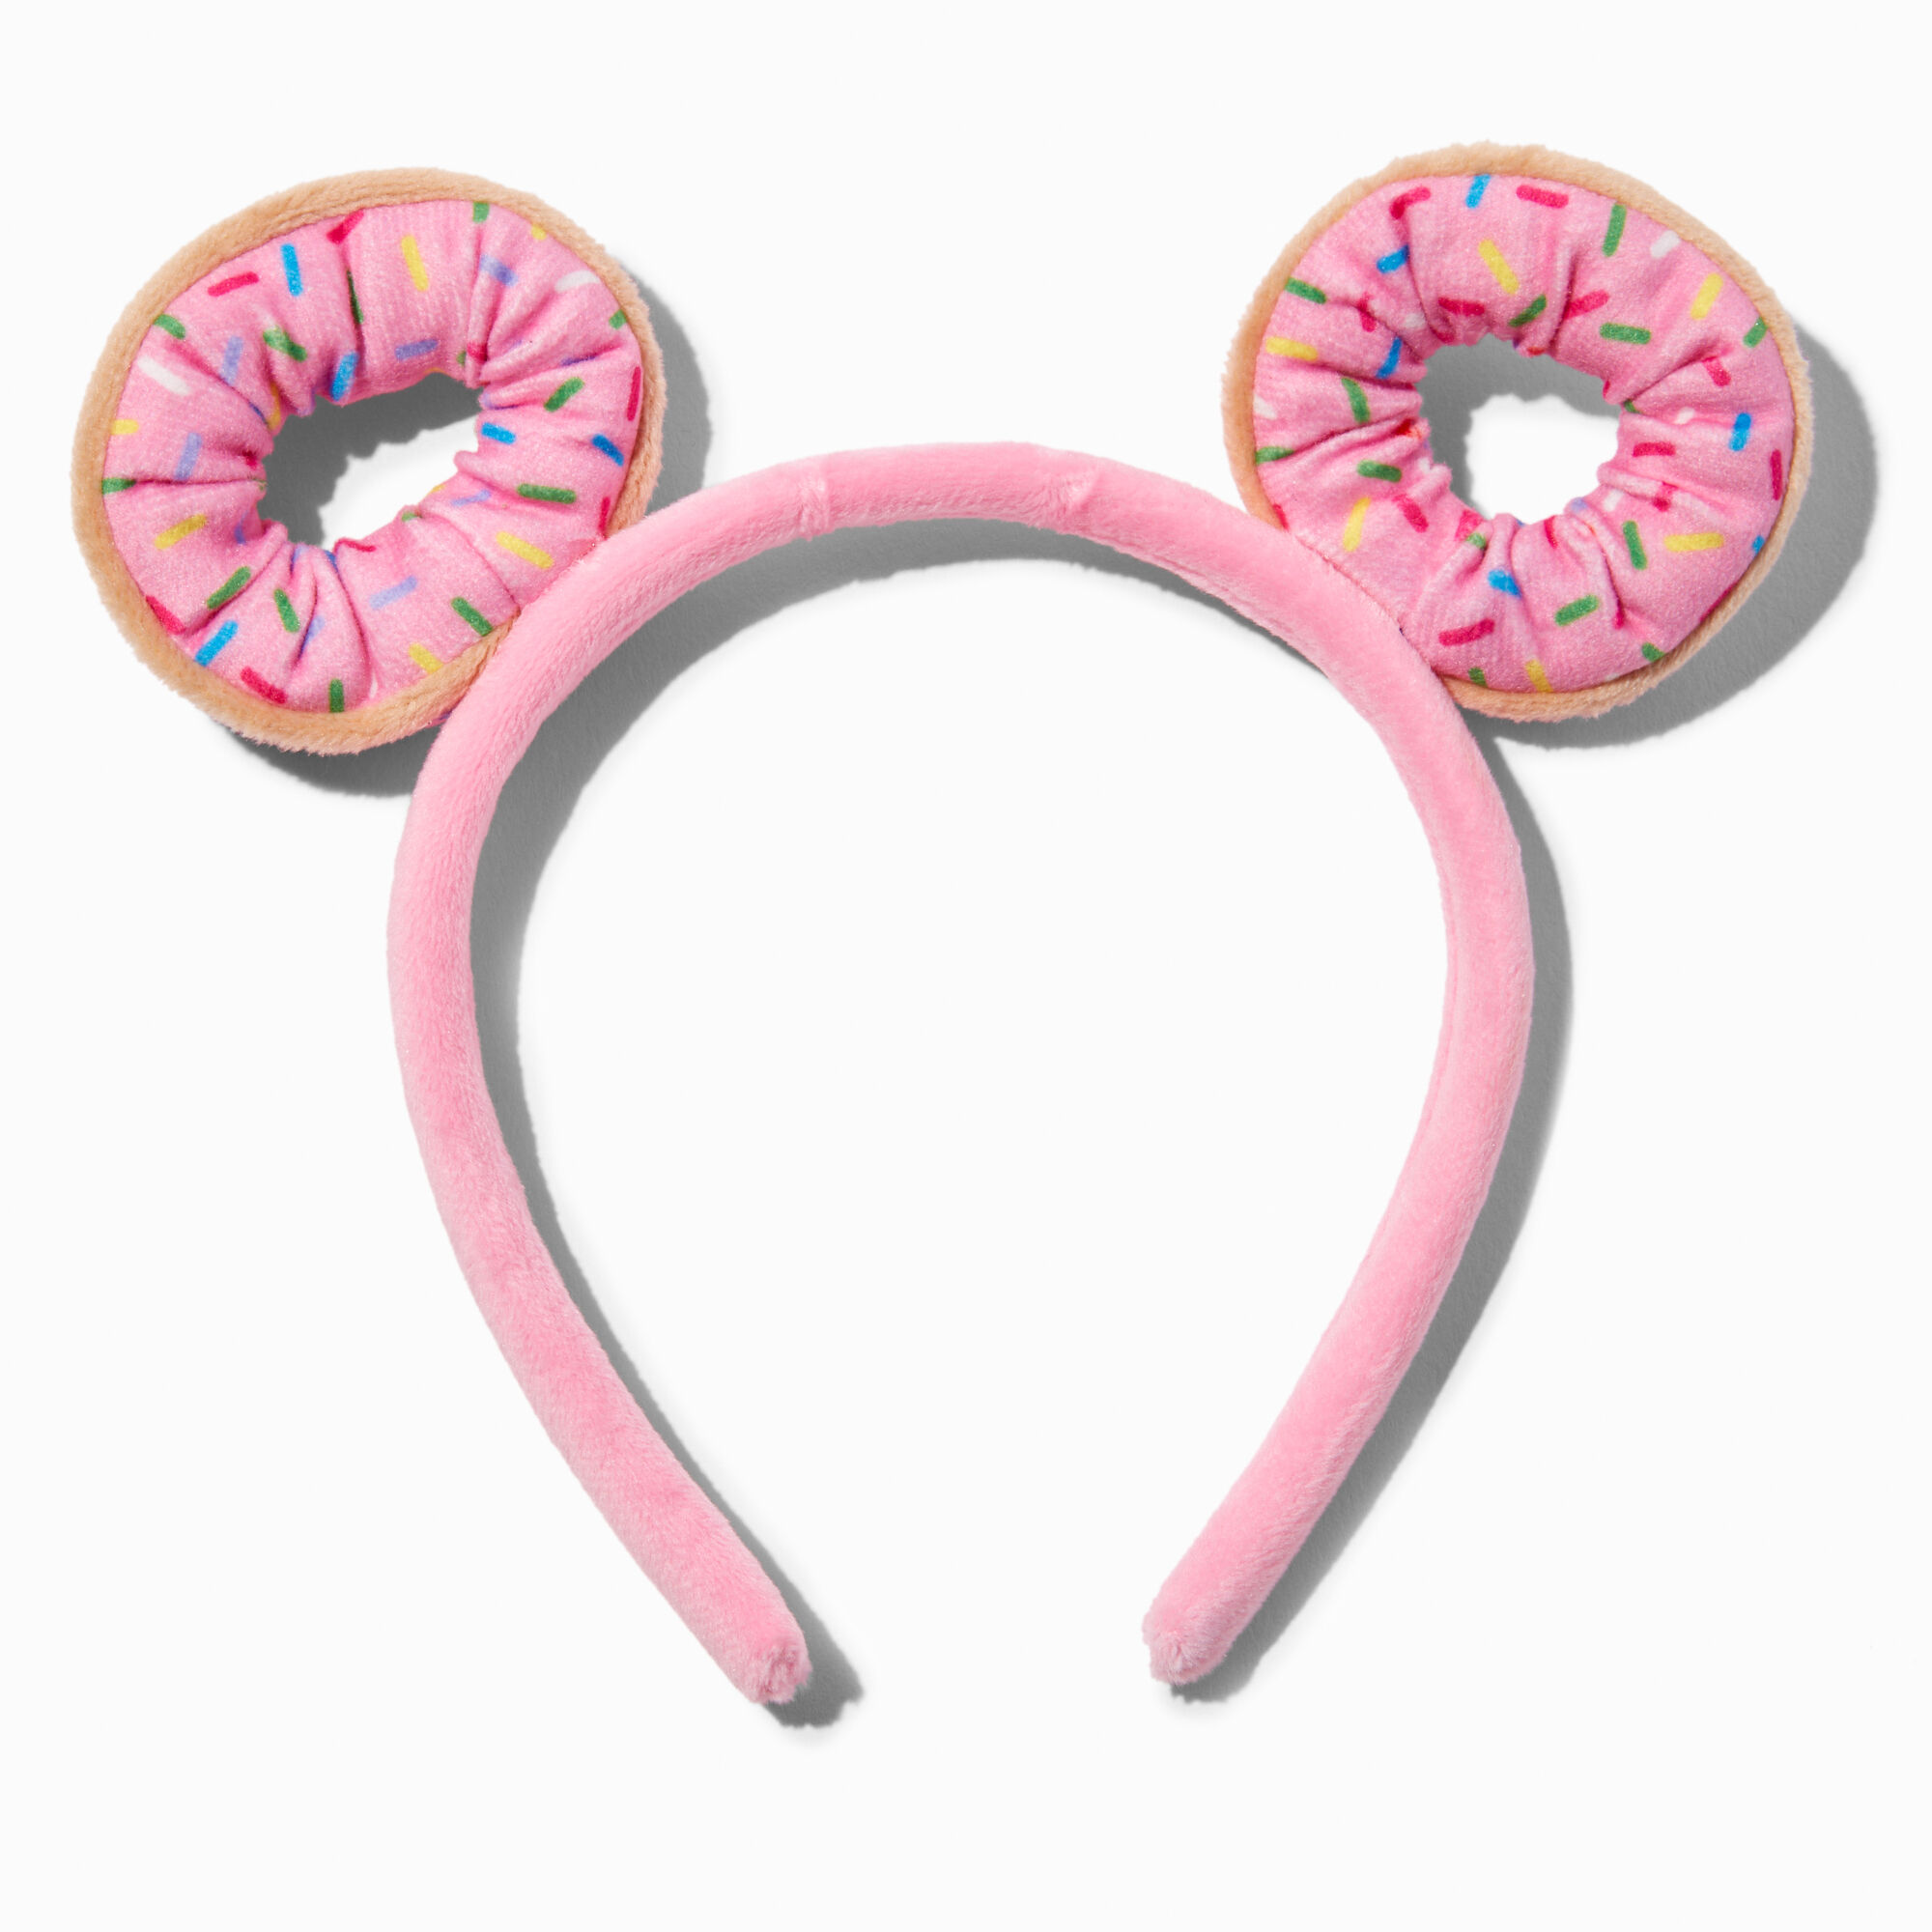 View Claires Sprinkle Donut Ears Headband Pink information